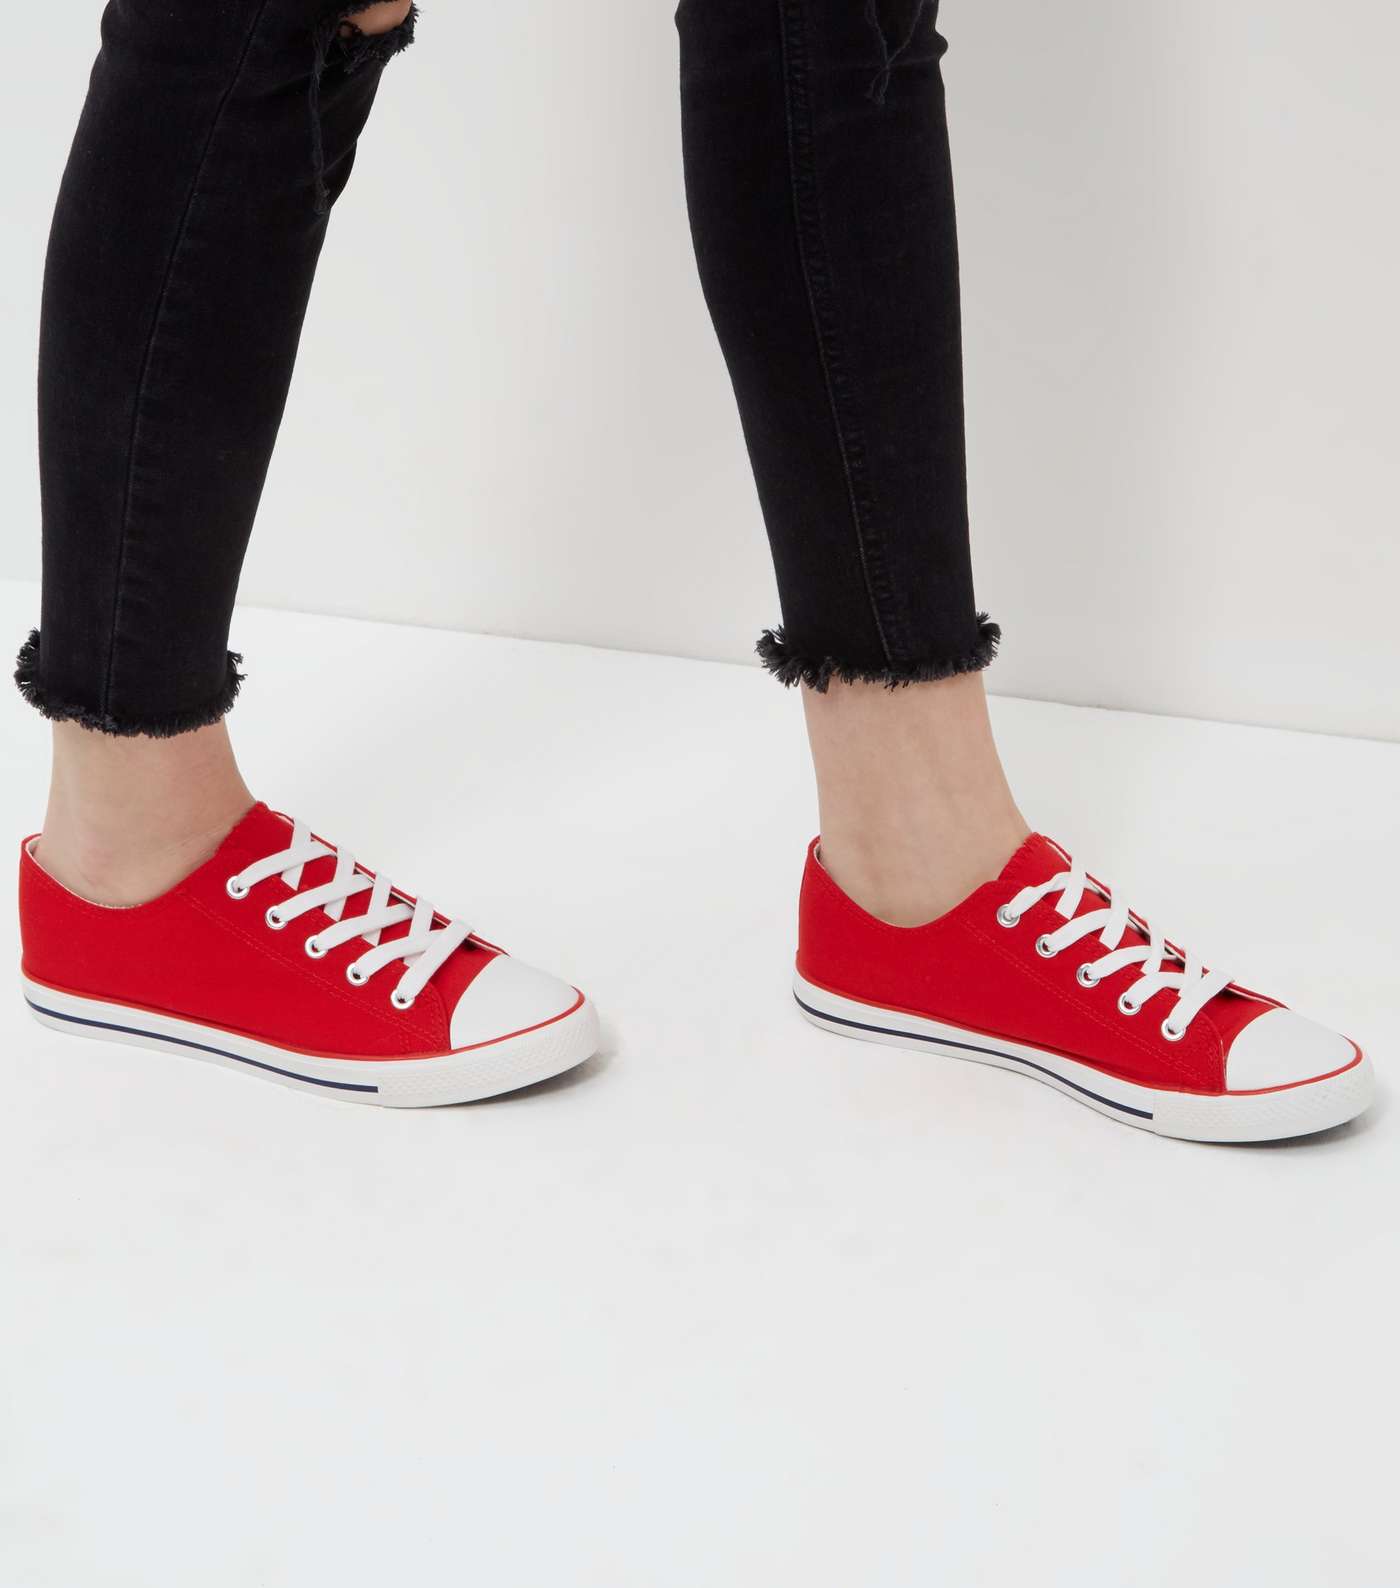 Red Lace Up Striped Sole Plimsolls  Image 5